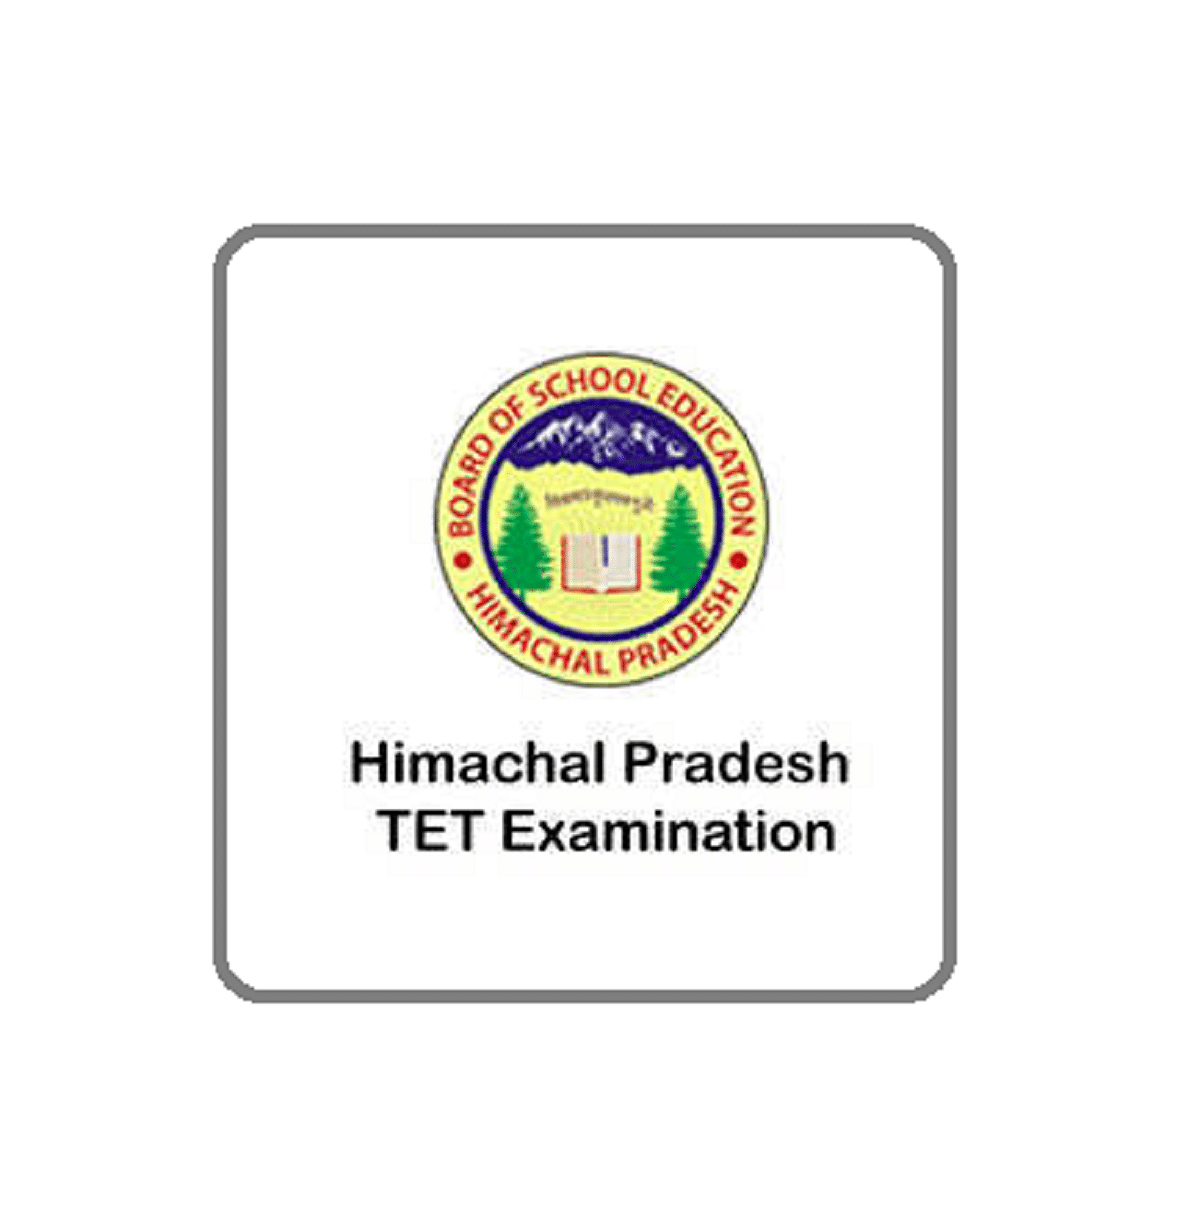 HP TET Admit Card 2019 Released, Download Now